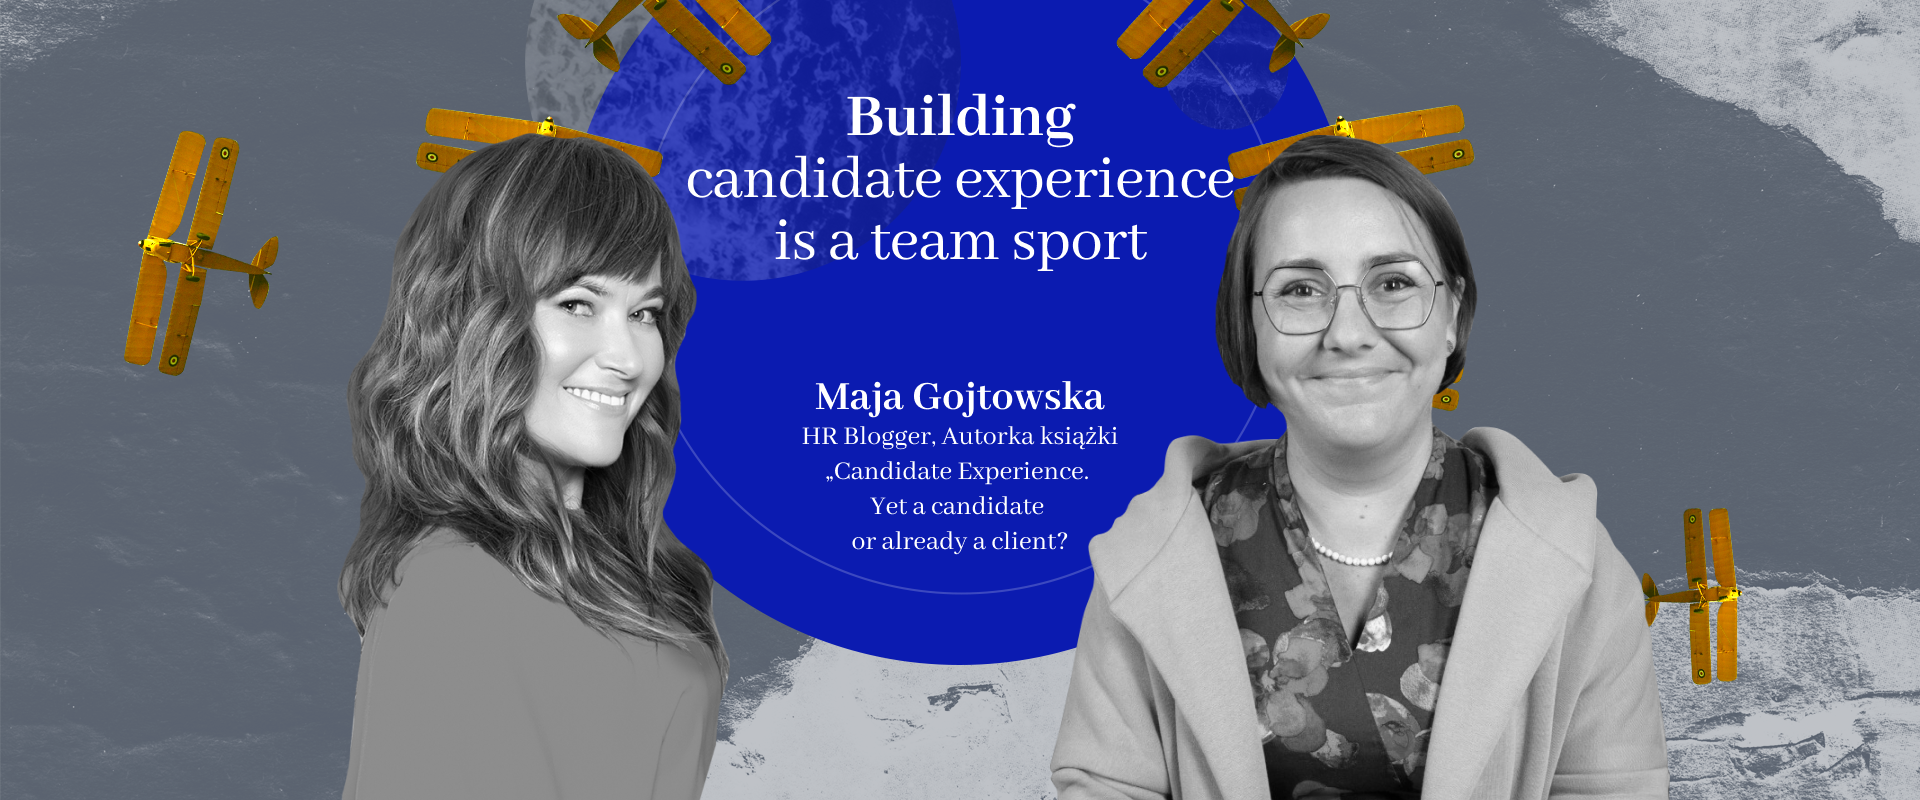 Building candidate experience is a team sport